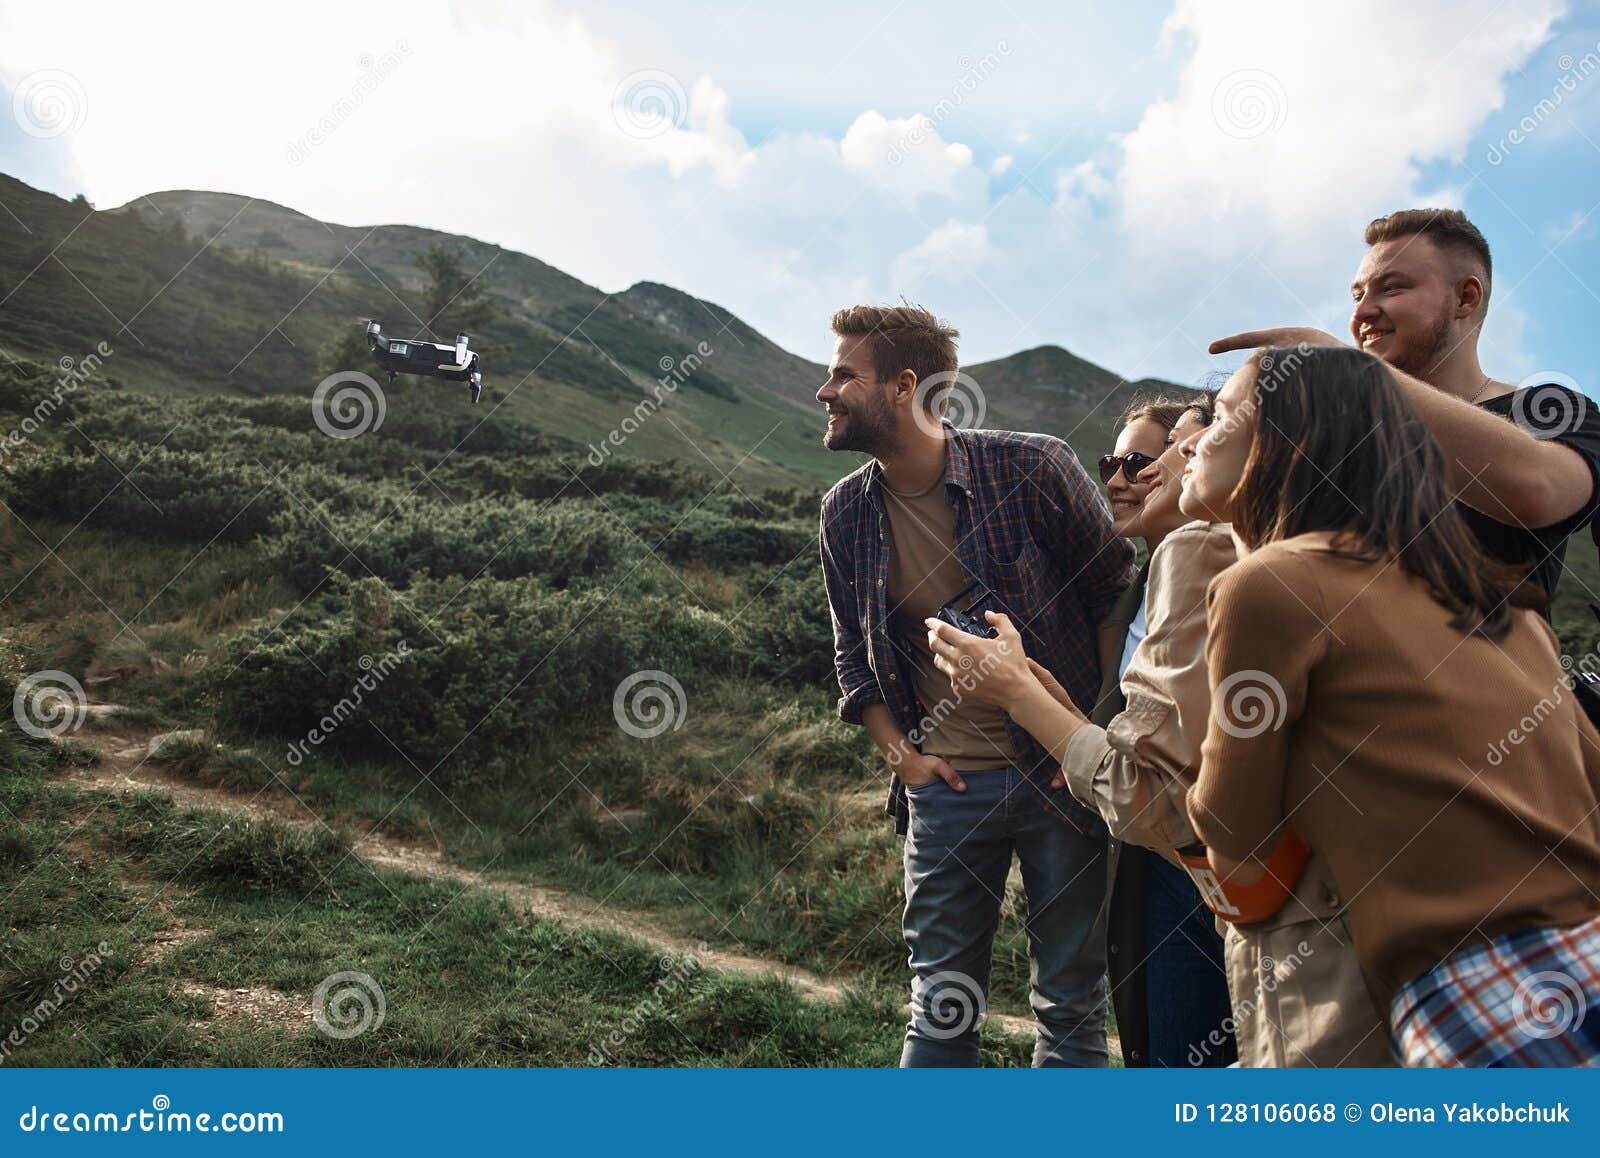 curious friends smiling and looking at the flying dron